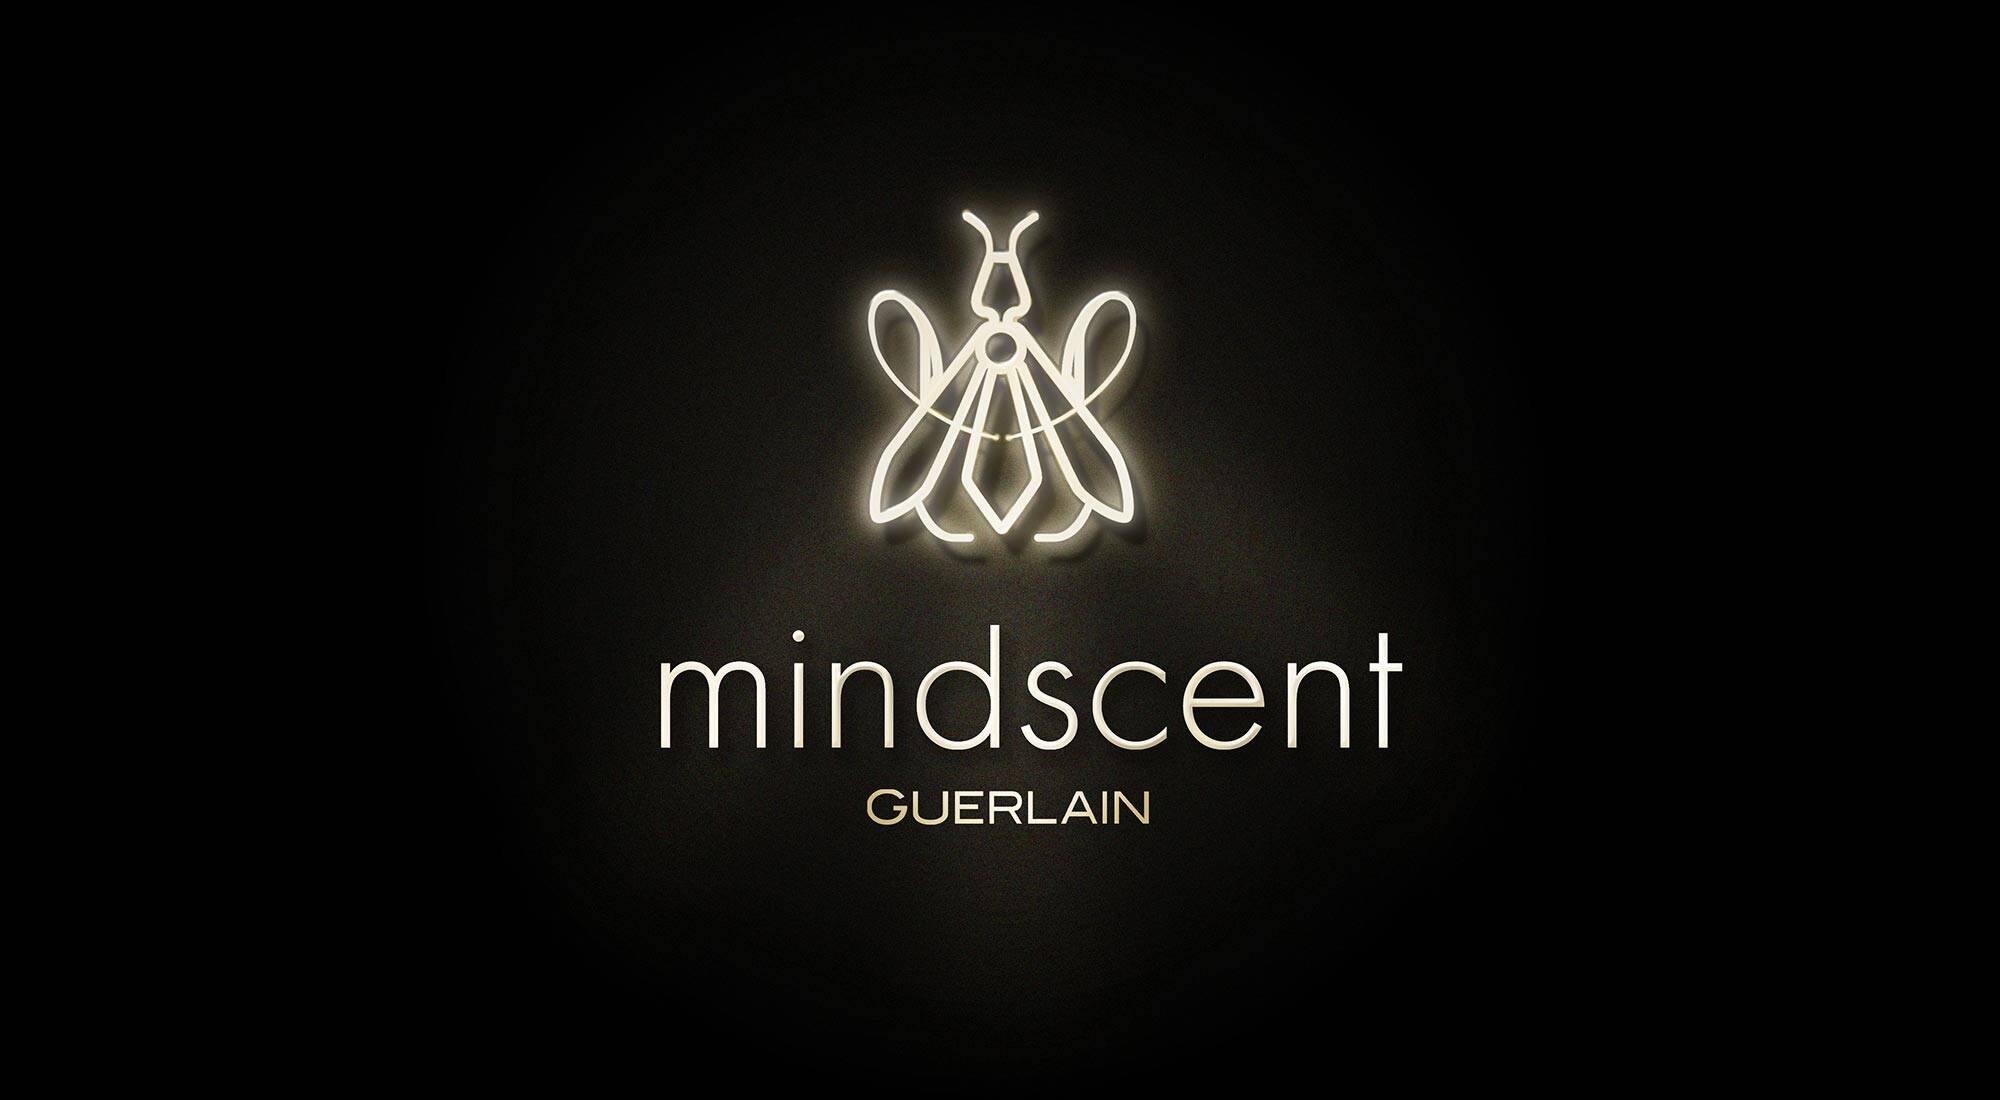 Mindscent fragrance finder inspired by Guerlain brings a new perfume  experience to Guerlain boutiques - LVMH